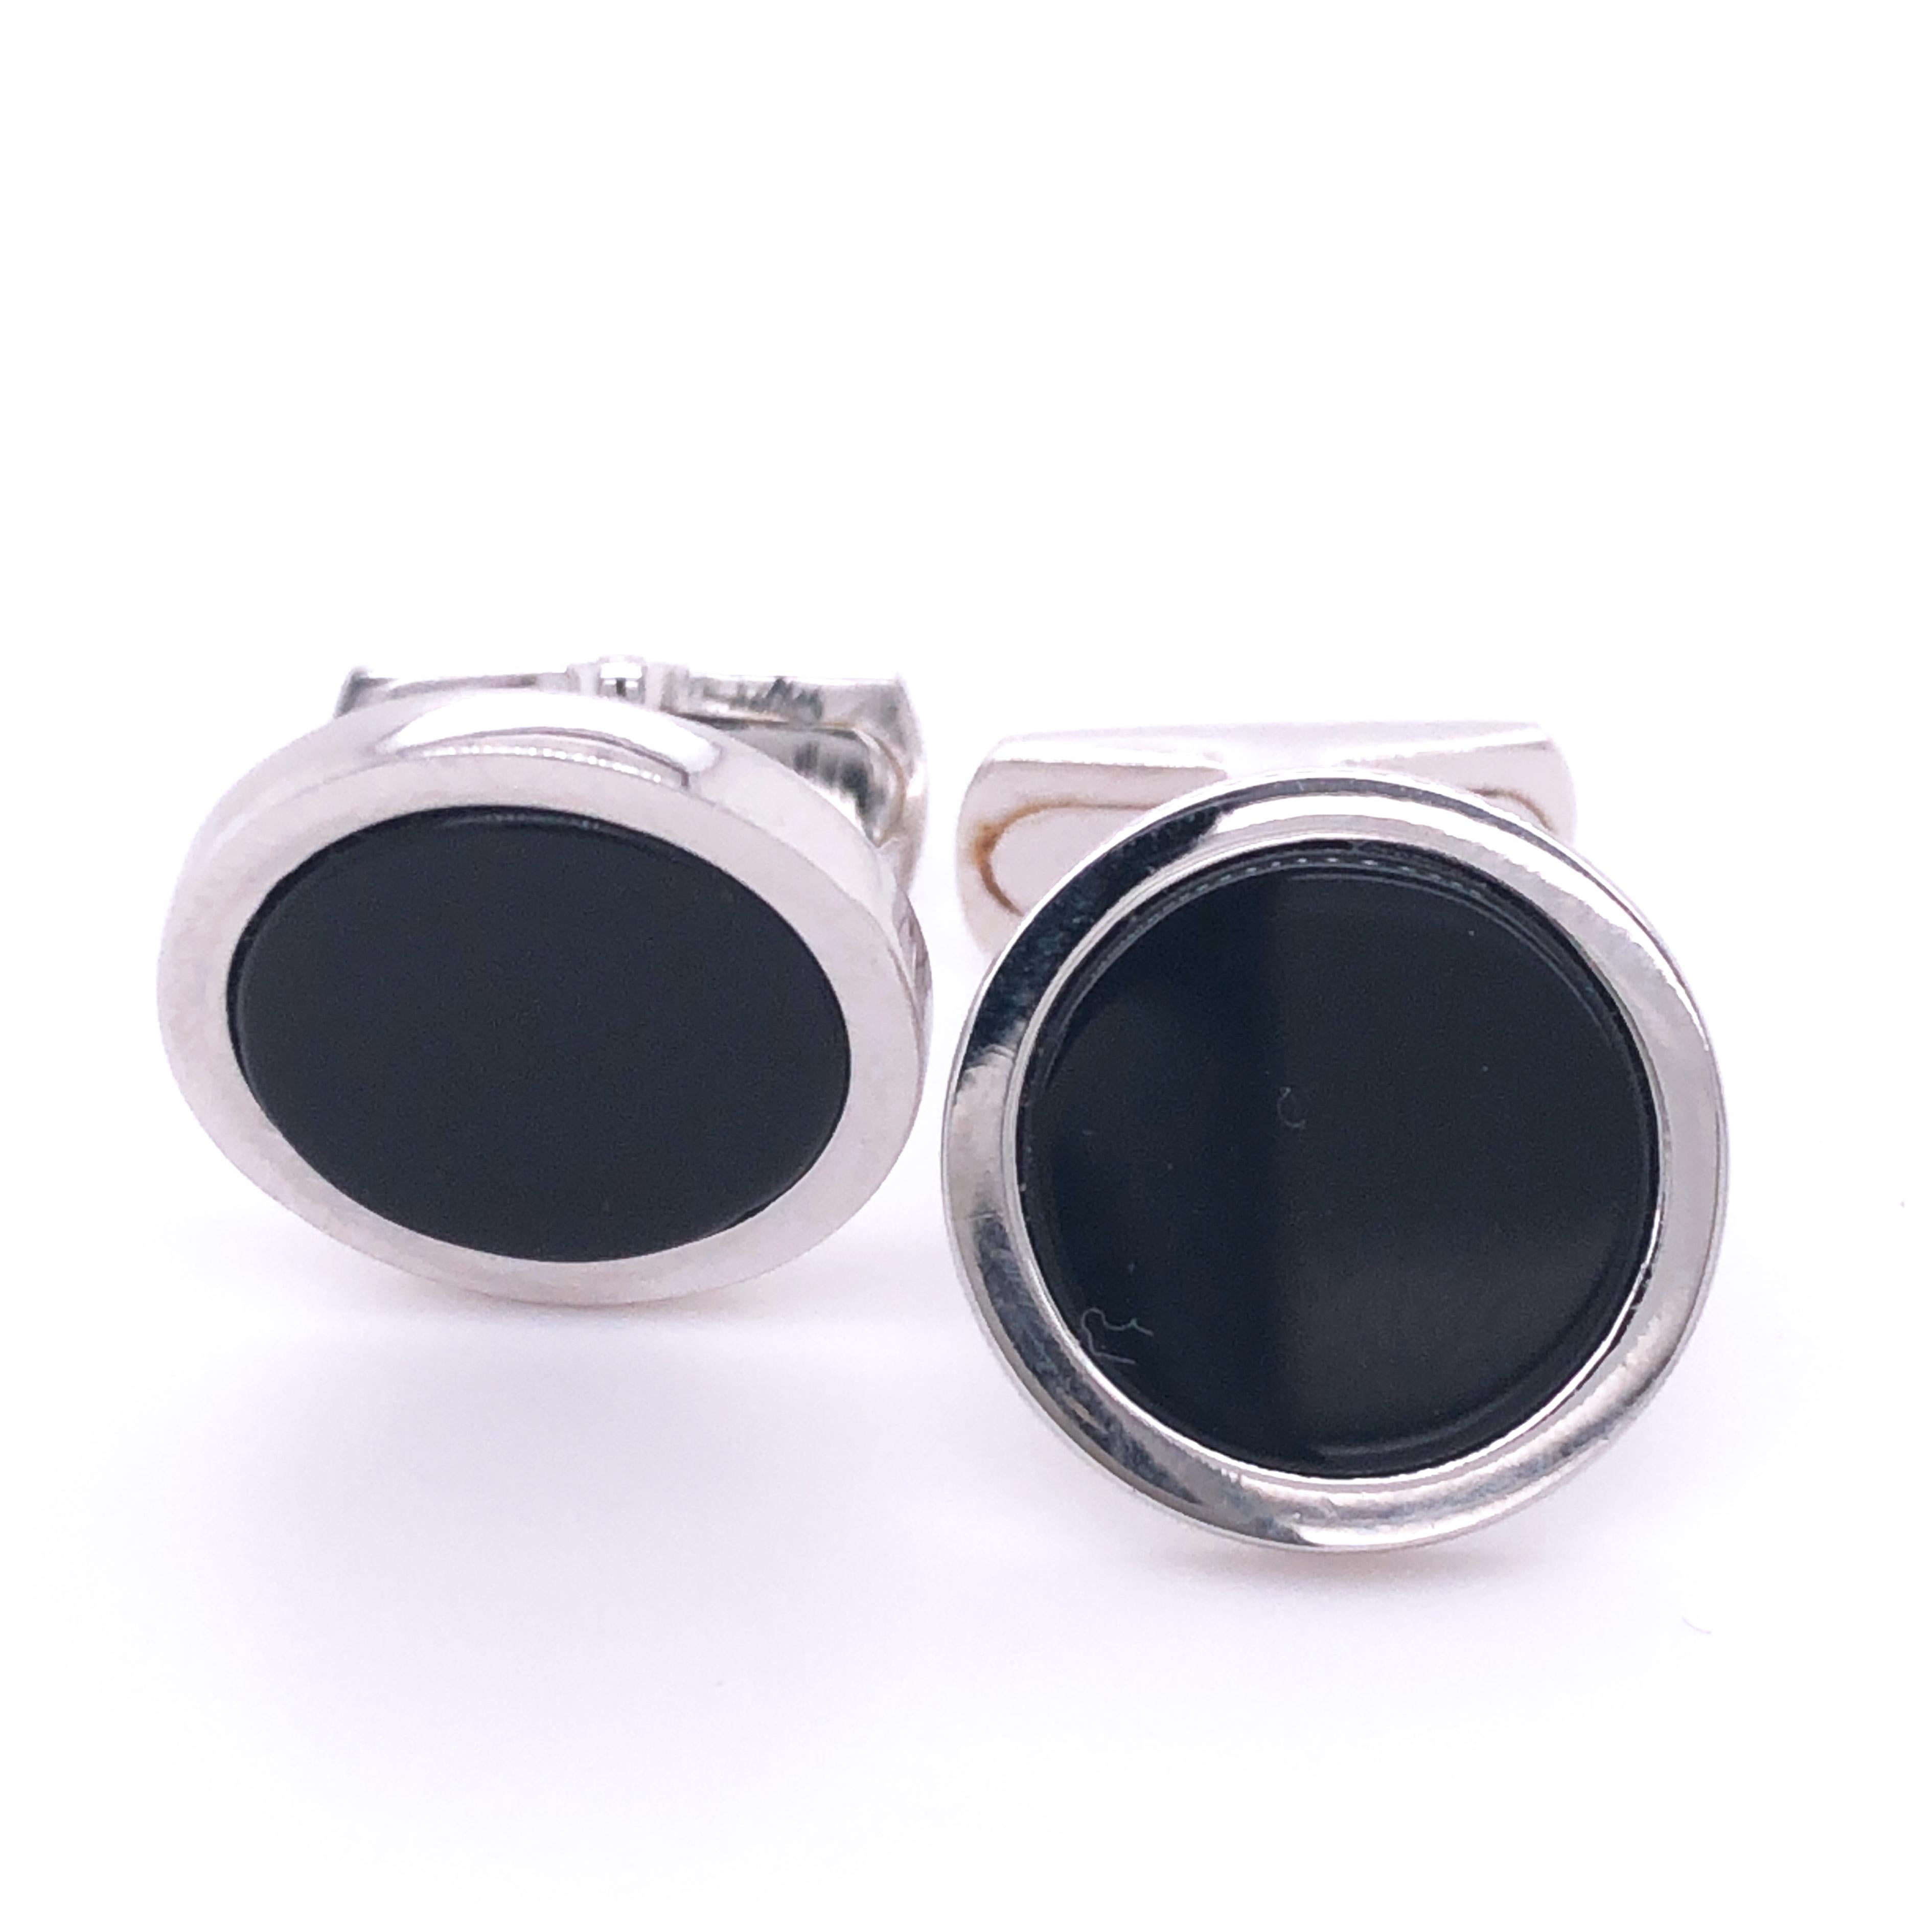 Chic and Timeless, Natural Hand Inlaid Onyx Round Shaped Sterling Silver Cufflinks, T-bar back.
In our smart fitted Black Box and Pouch.

